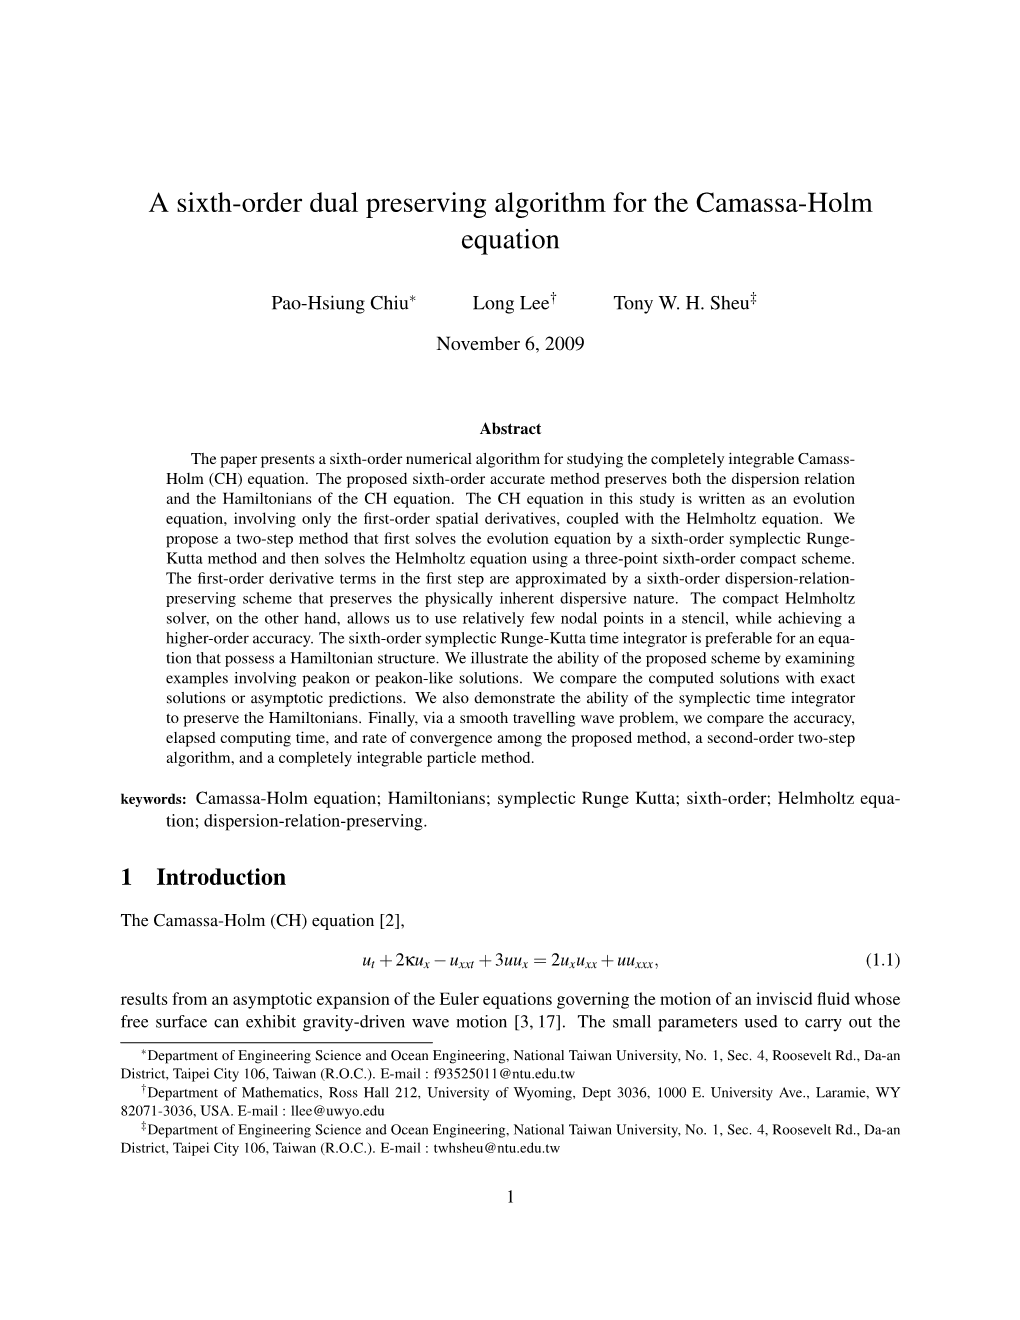 A Sixth-Order Dual Preserving Algorithm for the Camassa-Holm Equation